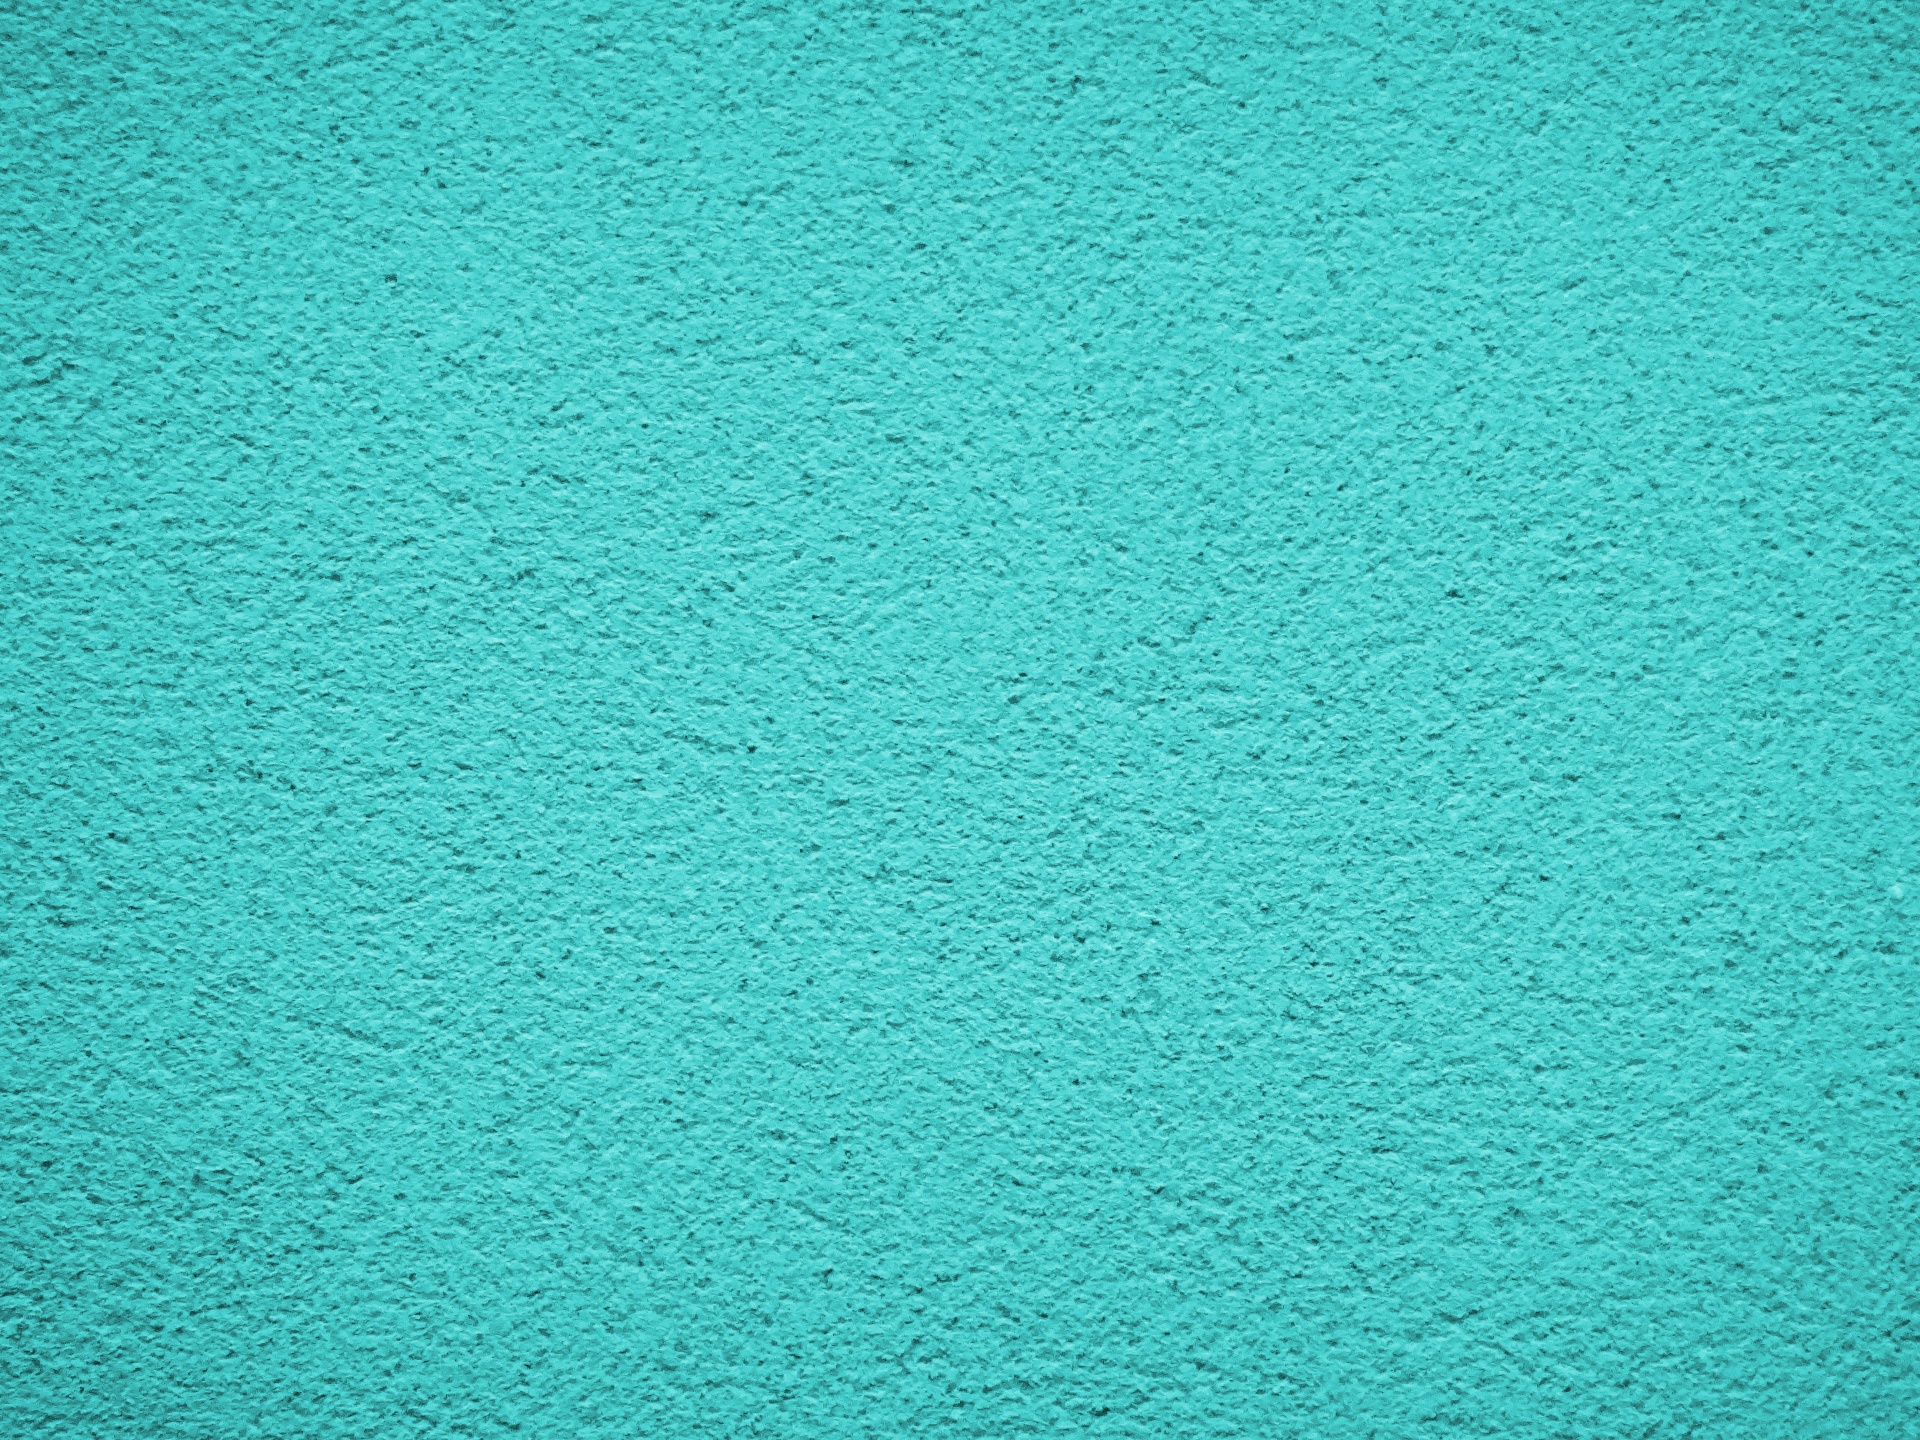 Turquoise Wallpaper Background Free Stock Photo Public HD Wallpapers Download Free Images Wallpaper [wallpaper981.blogspot.com]